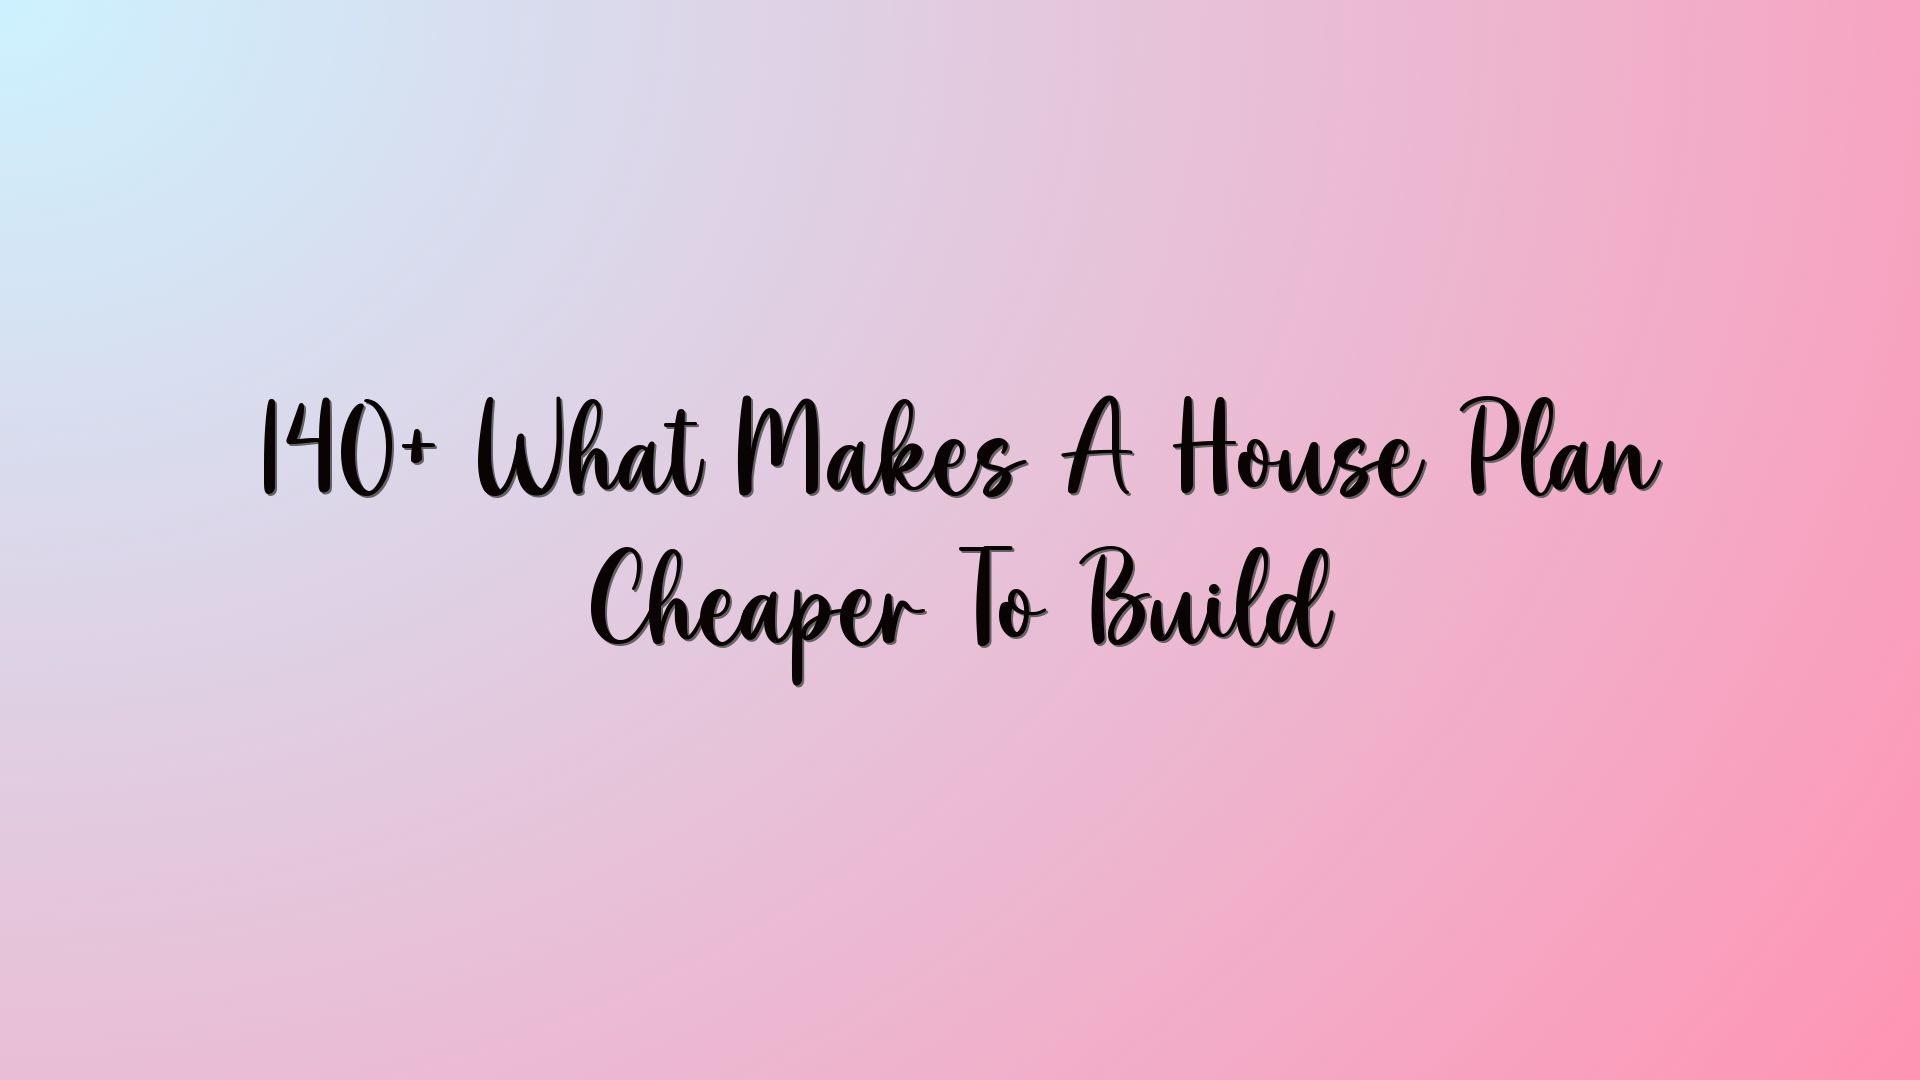 140+ What Makes A House Plan Cheaper To Build